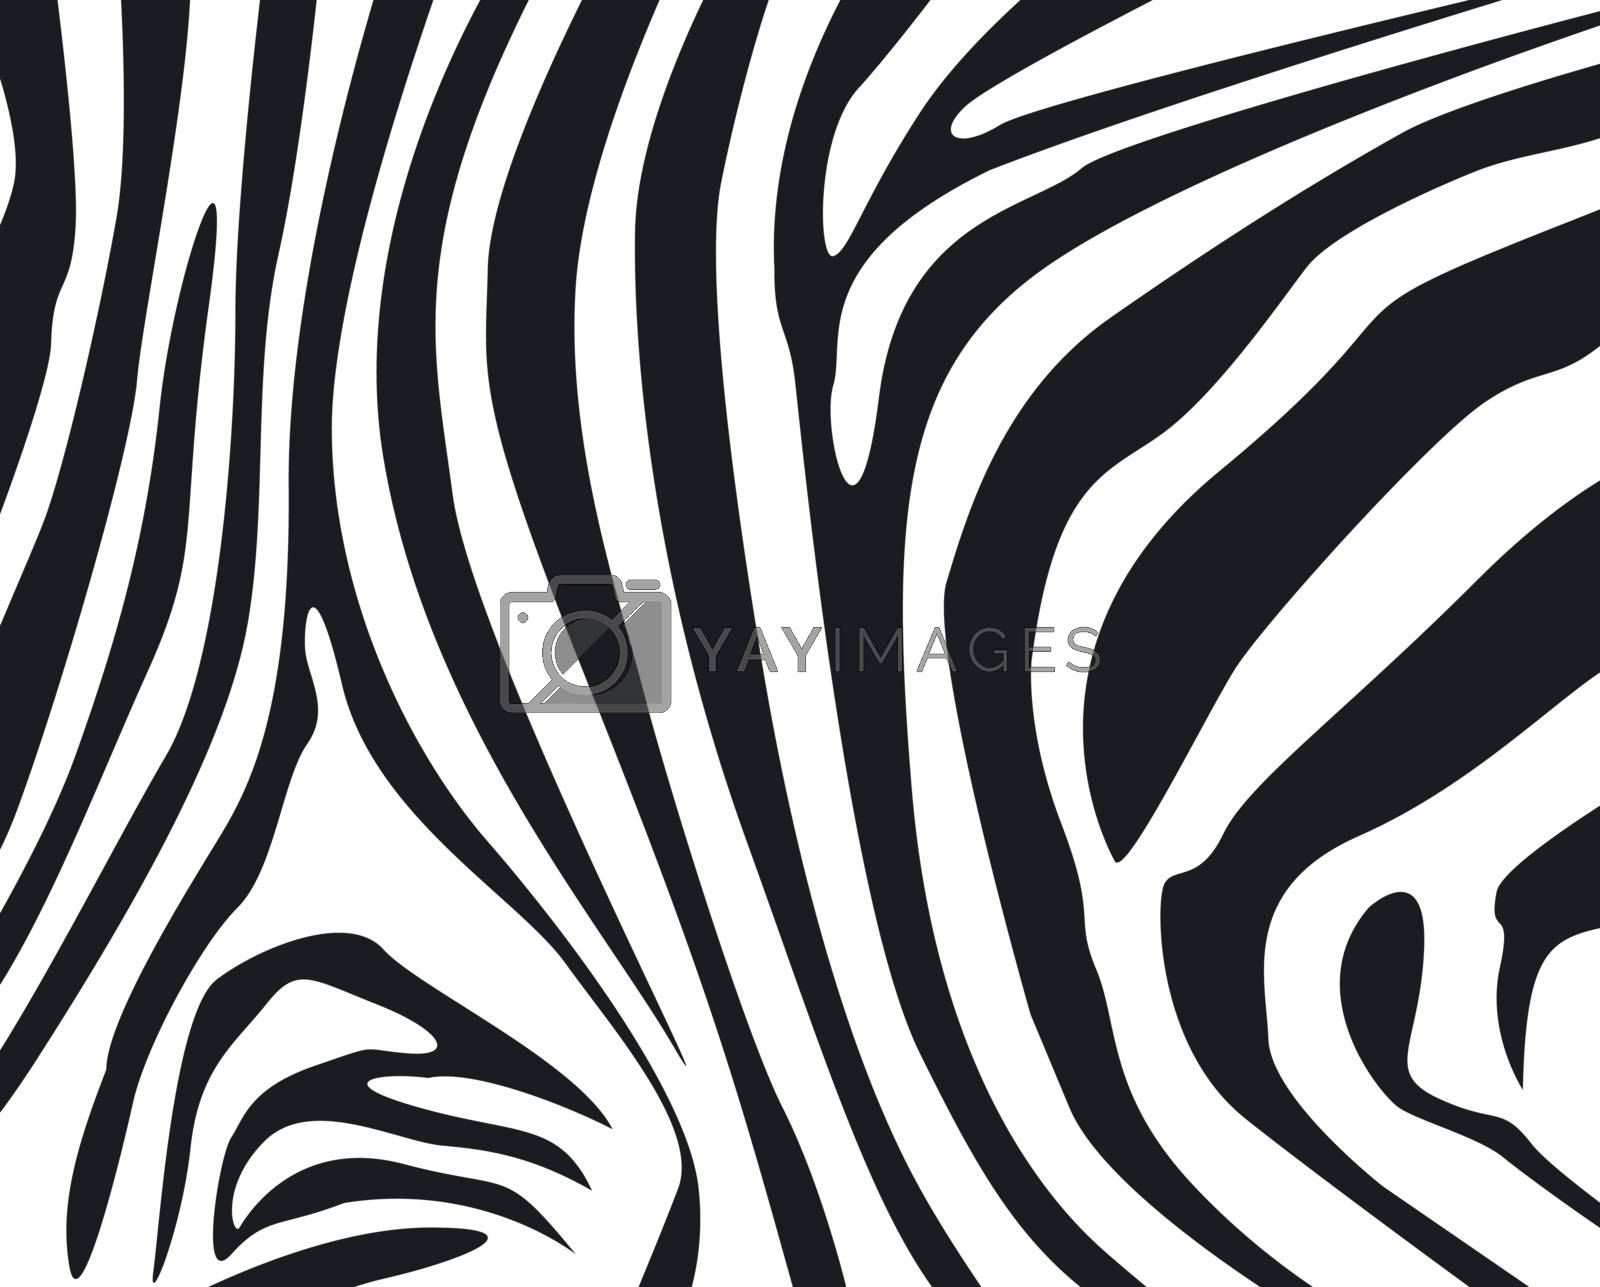 Royalty free image of zebra skin textured background by anankkml